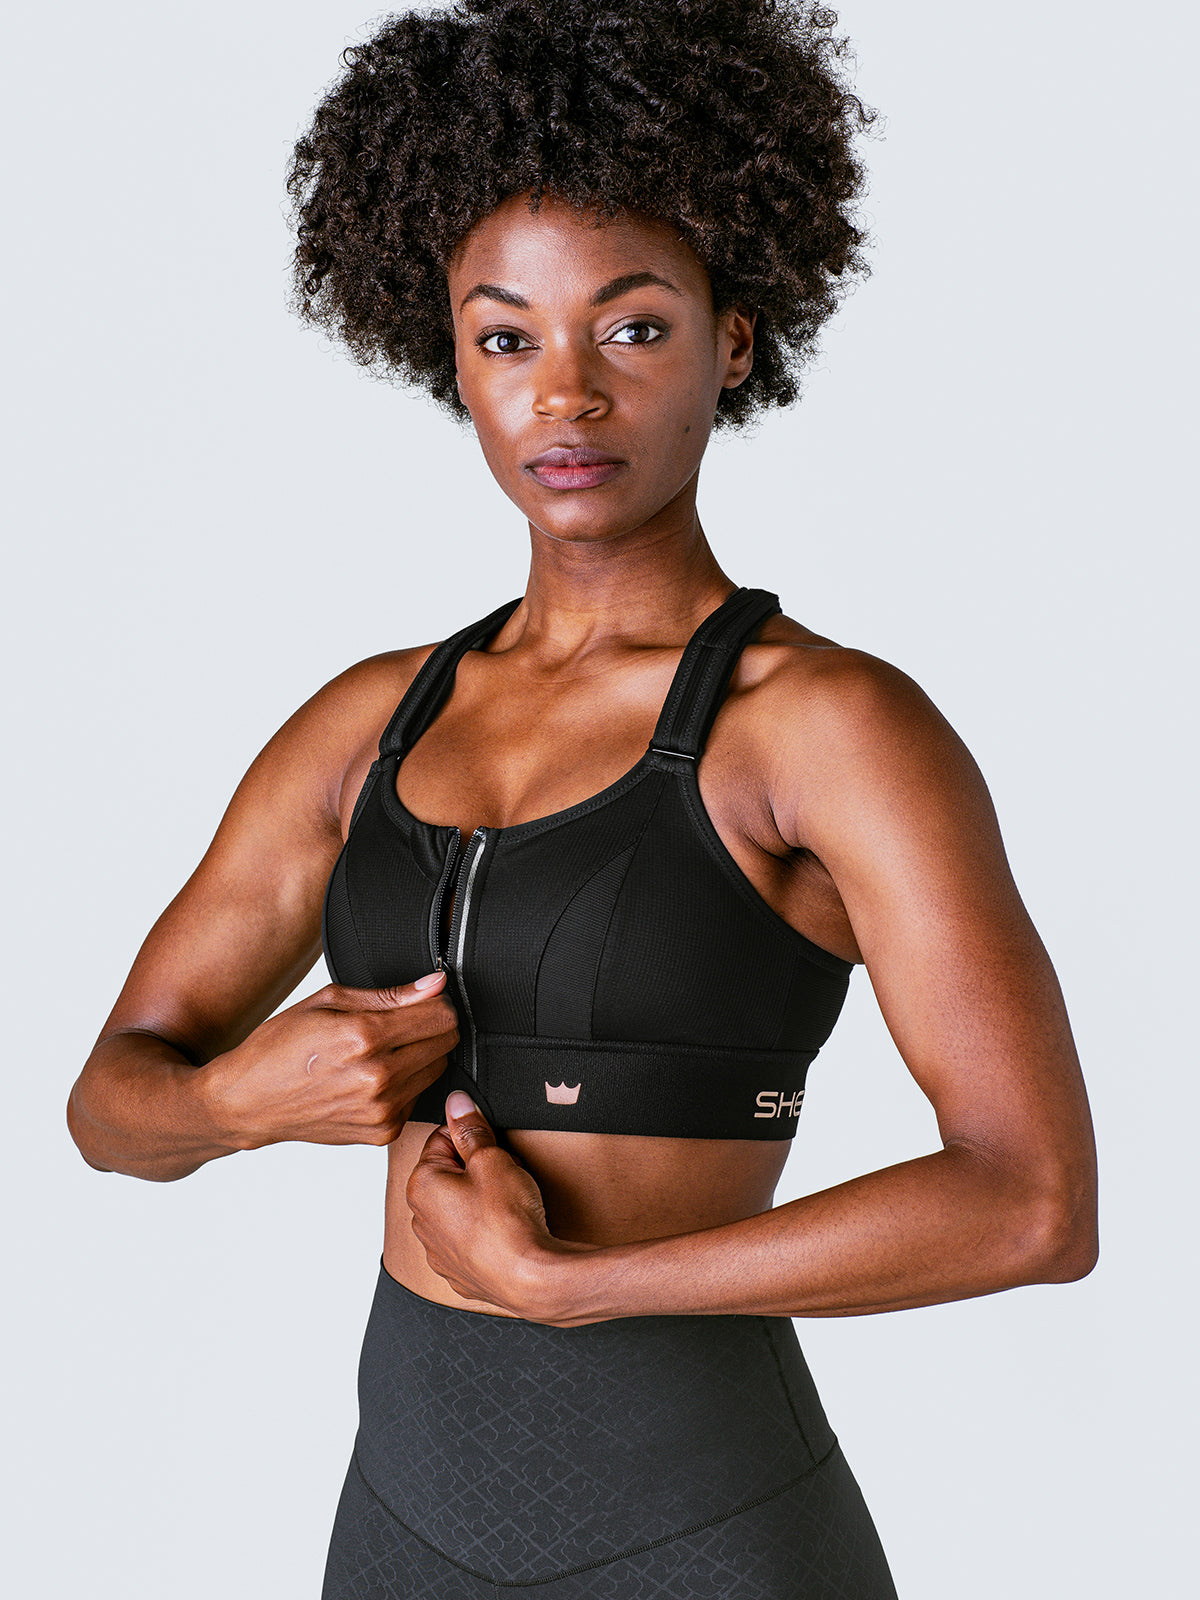 12 Best High-Impact Sports Bras With Support In 2023, According to Pros